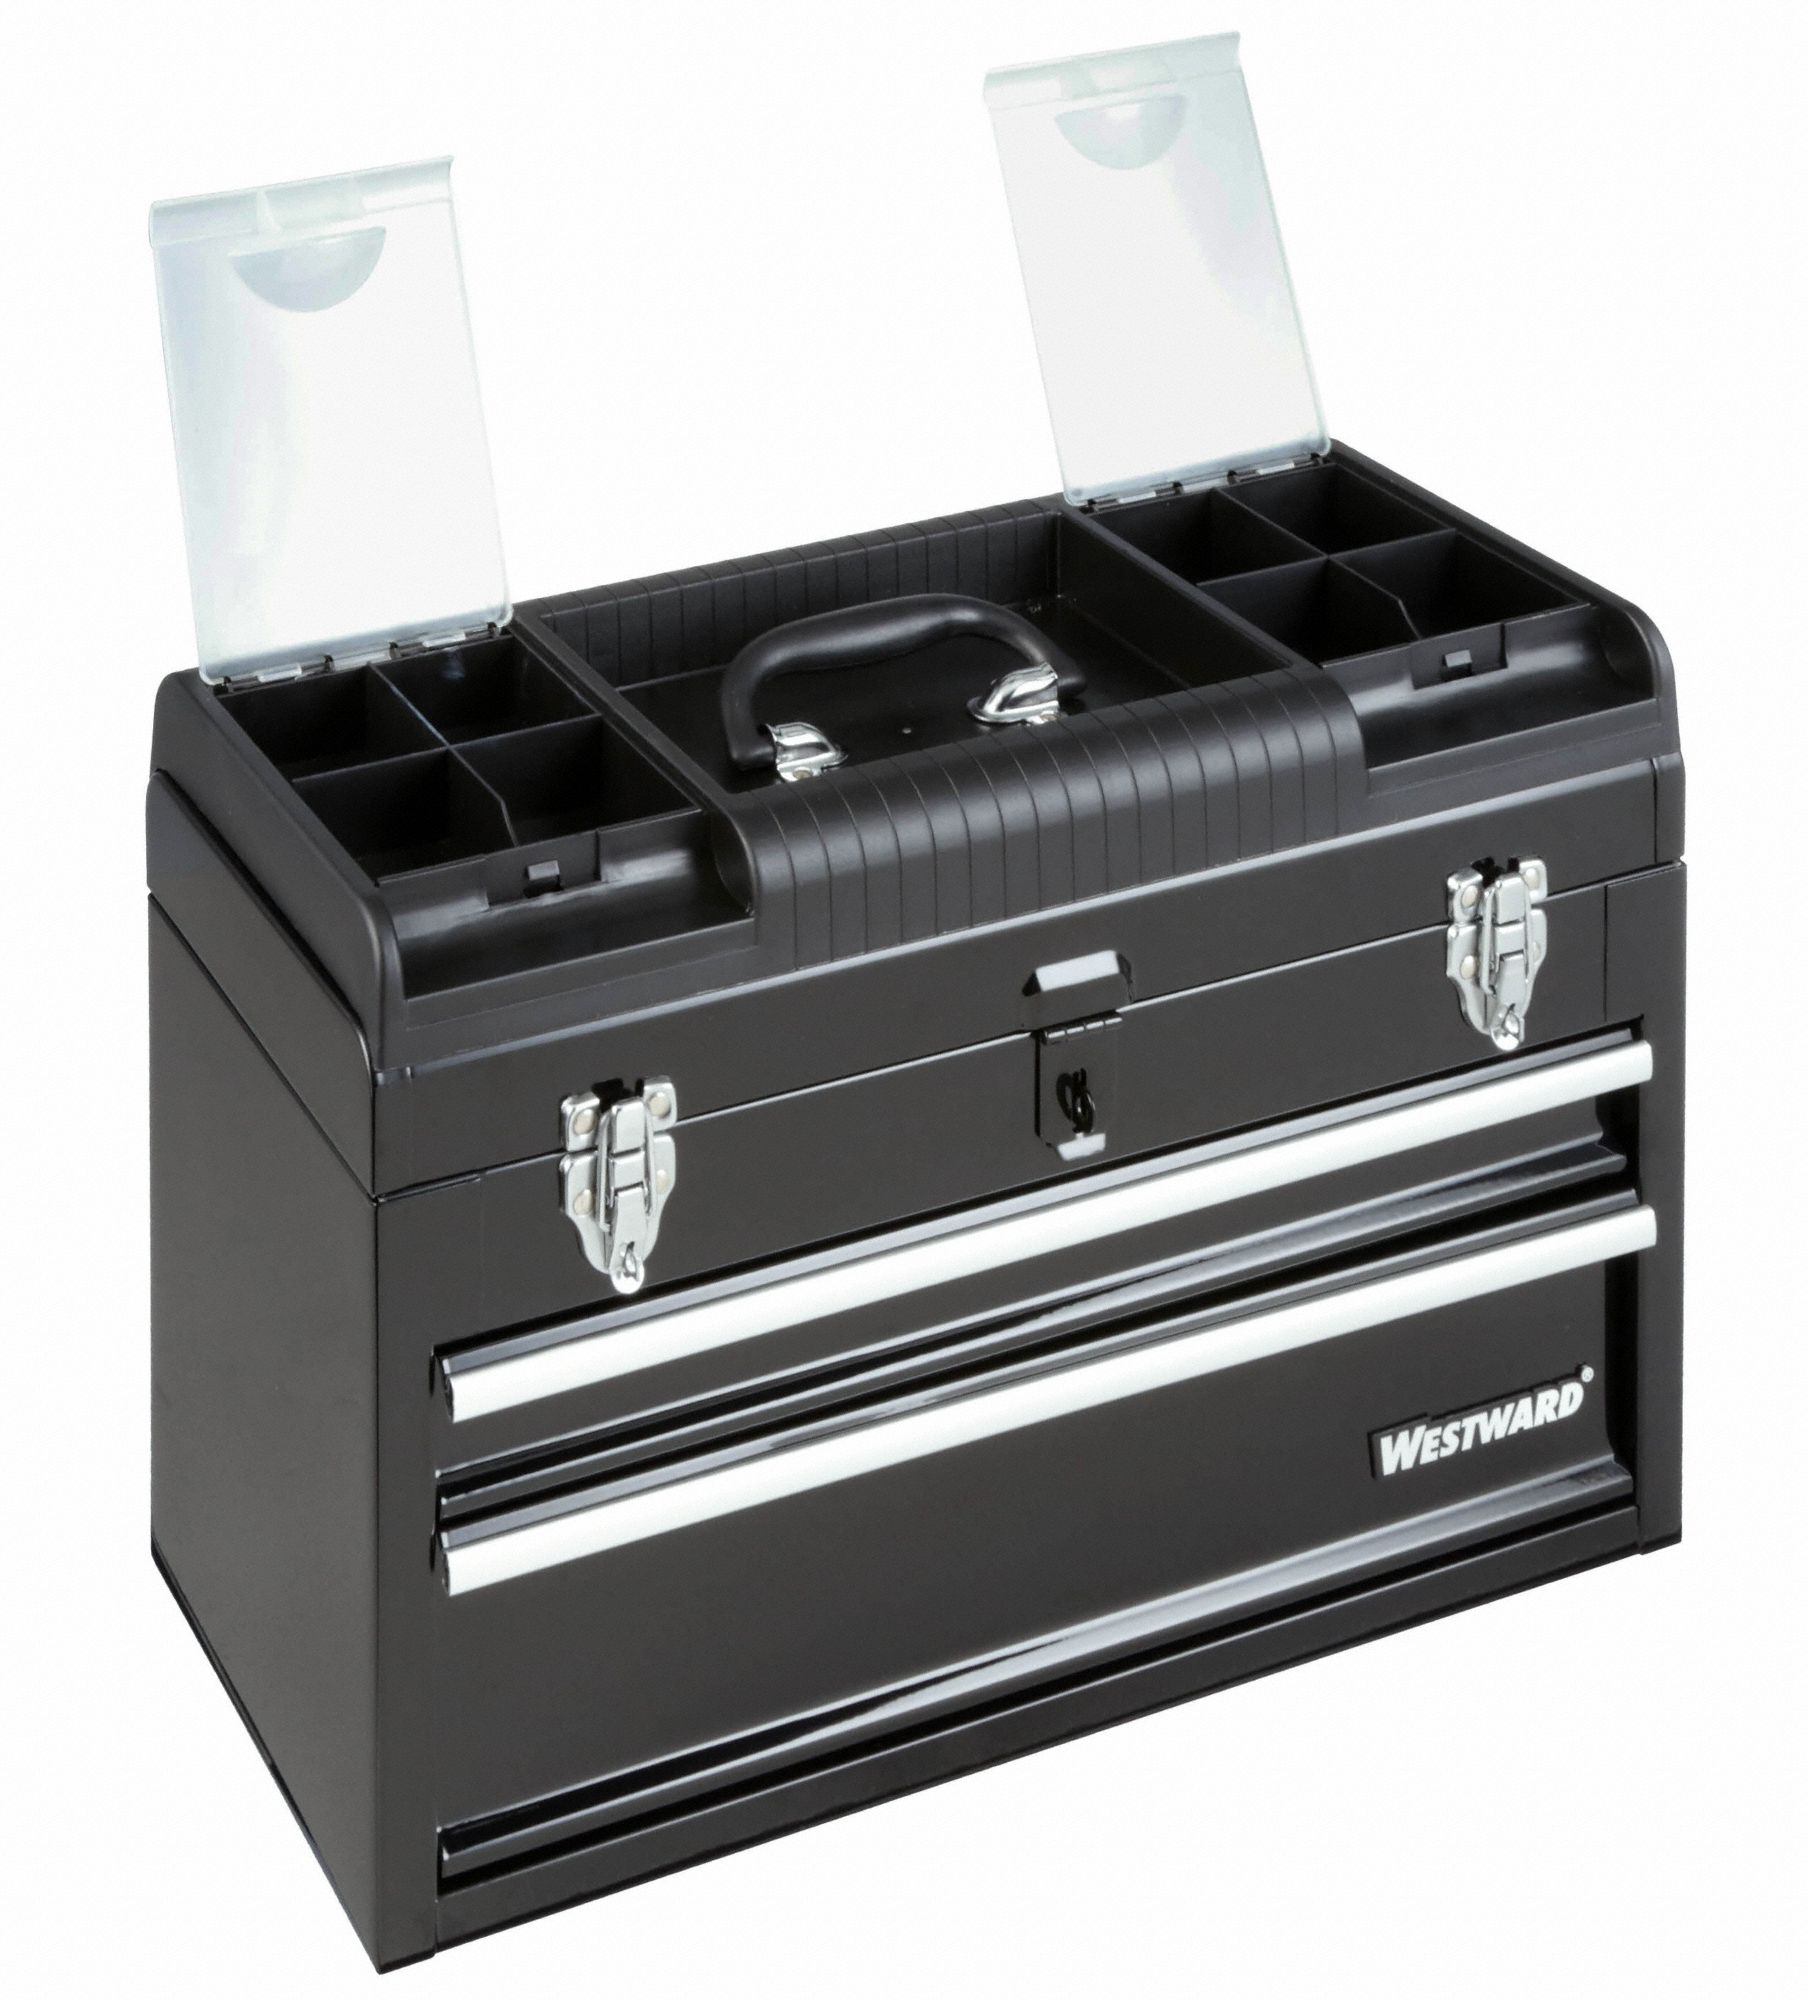 20 2-Drawer Portable Tool Chest